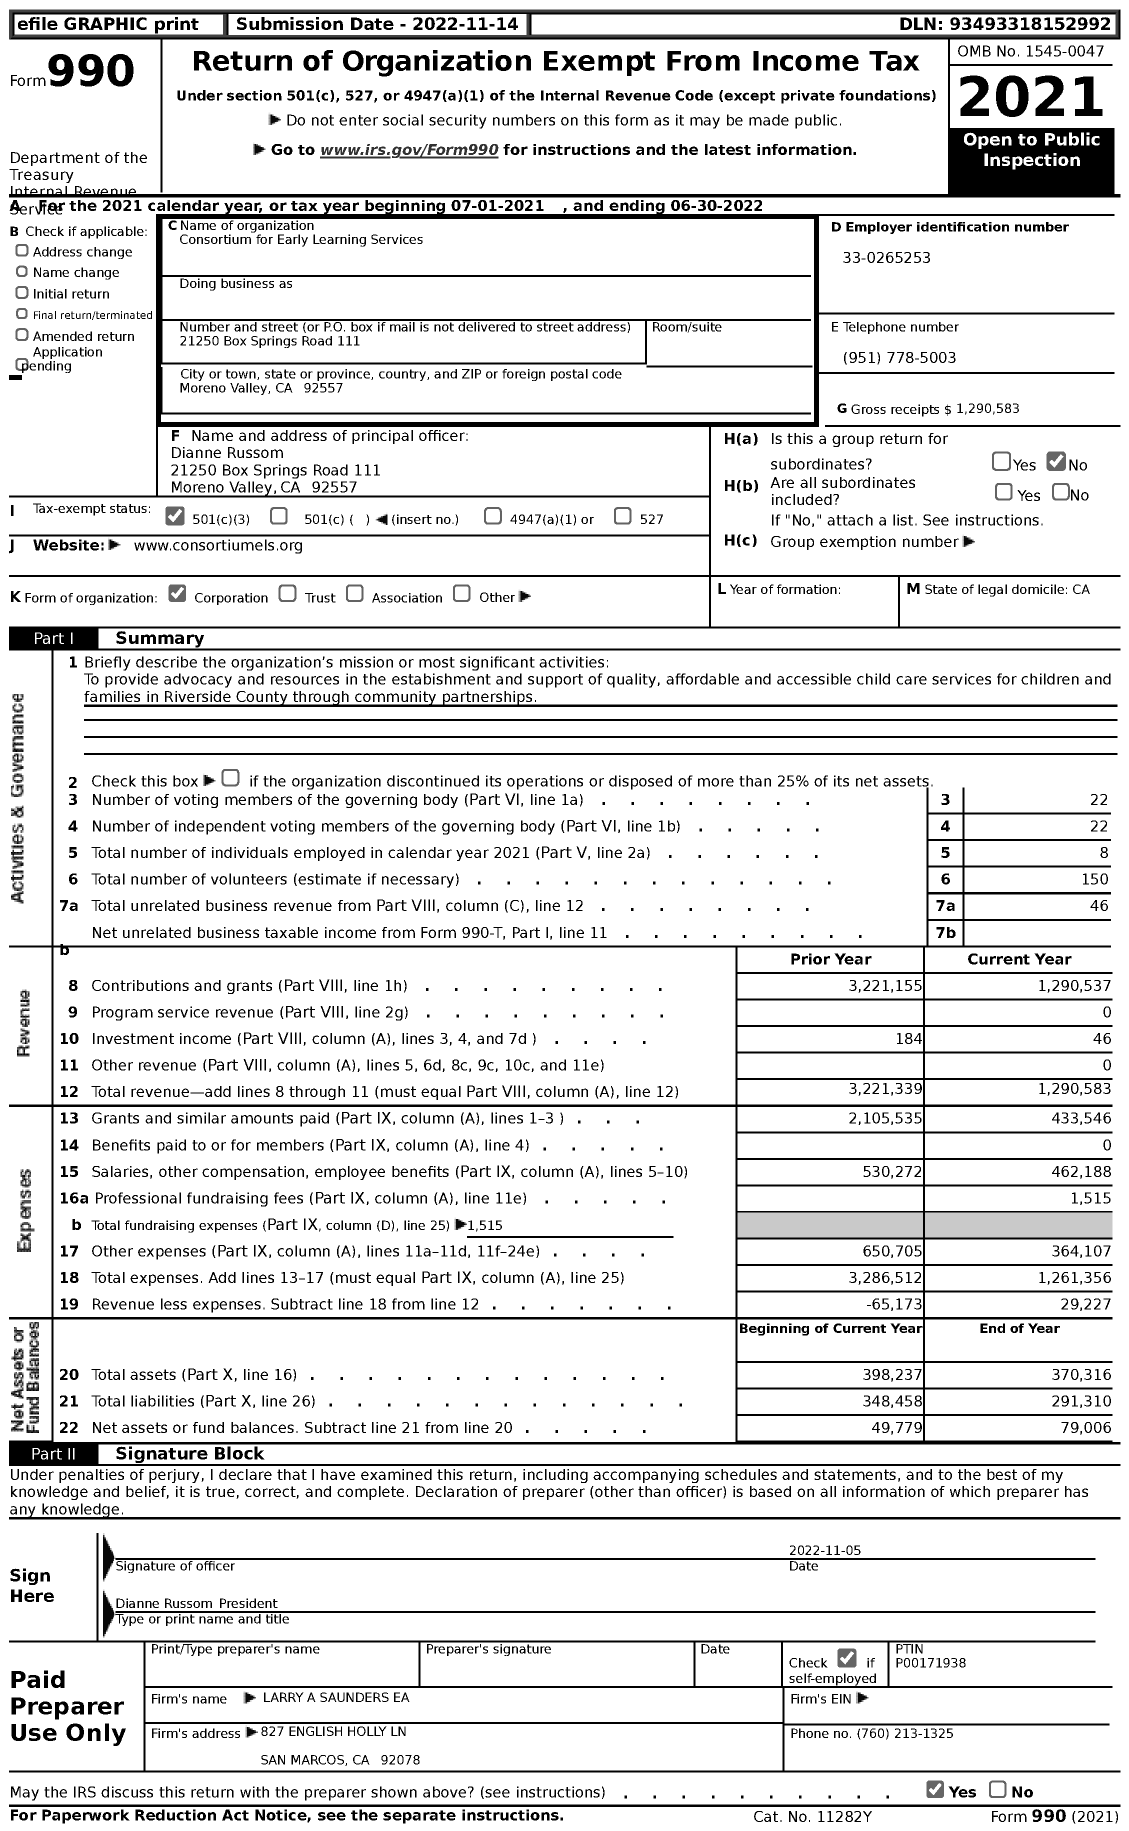 Image of first page of 2021 Form 990 for Consortium for Early Learning Services